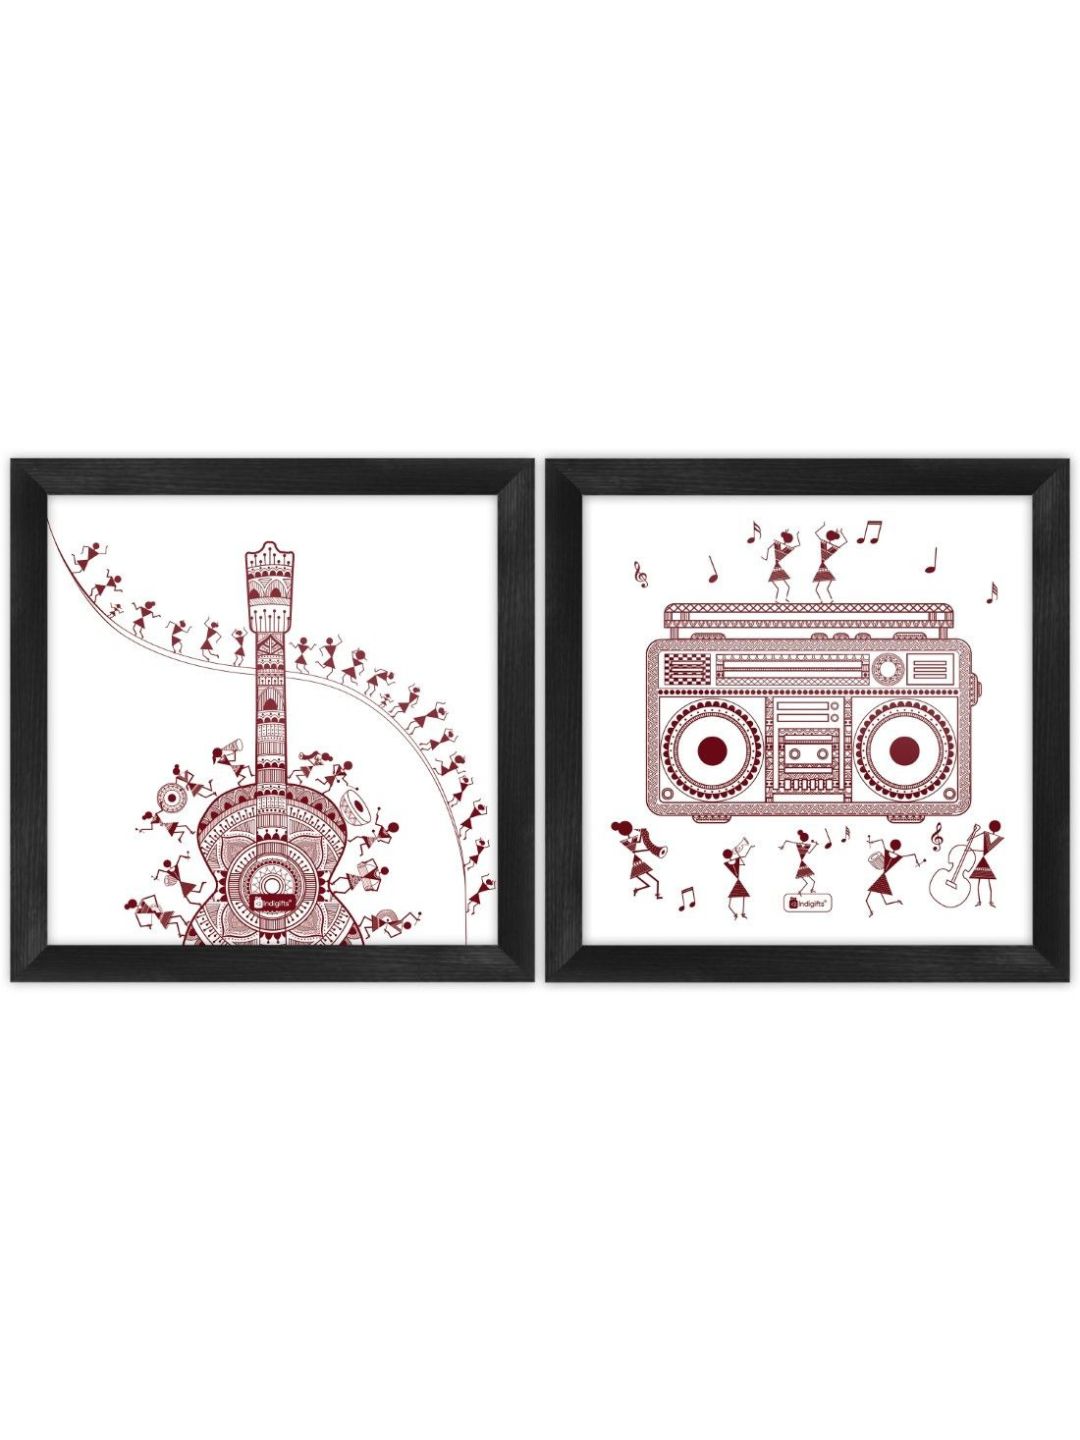 Indigifts Wall Decor For Living Room Music Lover Artistic Design Digital Print Poster Frames 6″x6″ Set of 2 – Home Wall Decorations Items, Diwali Home Decoration Items, Warli Art Posters Frame